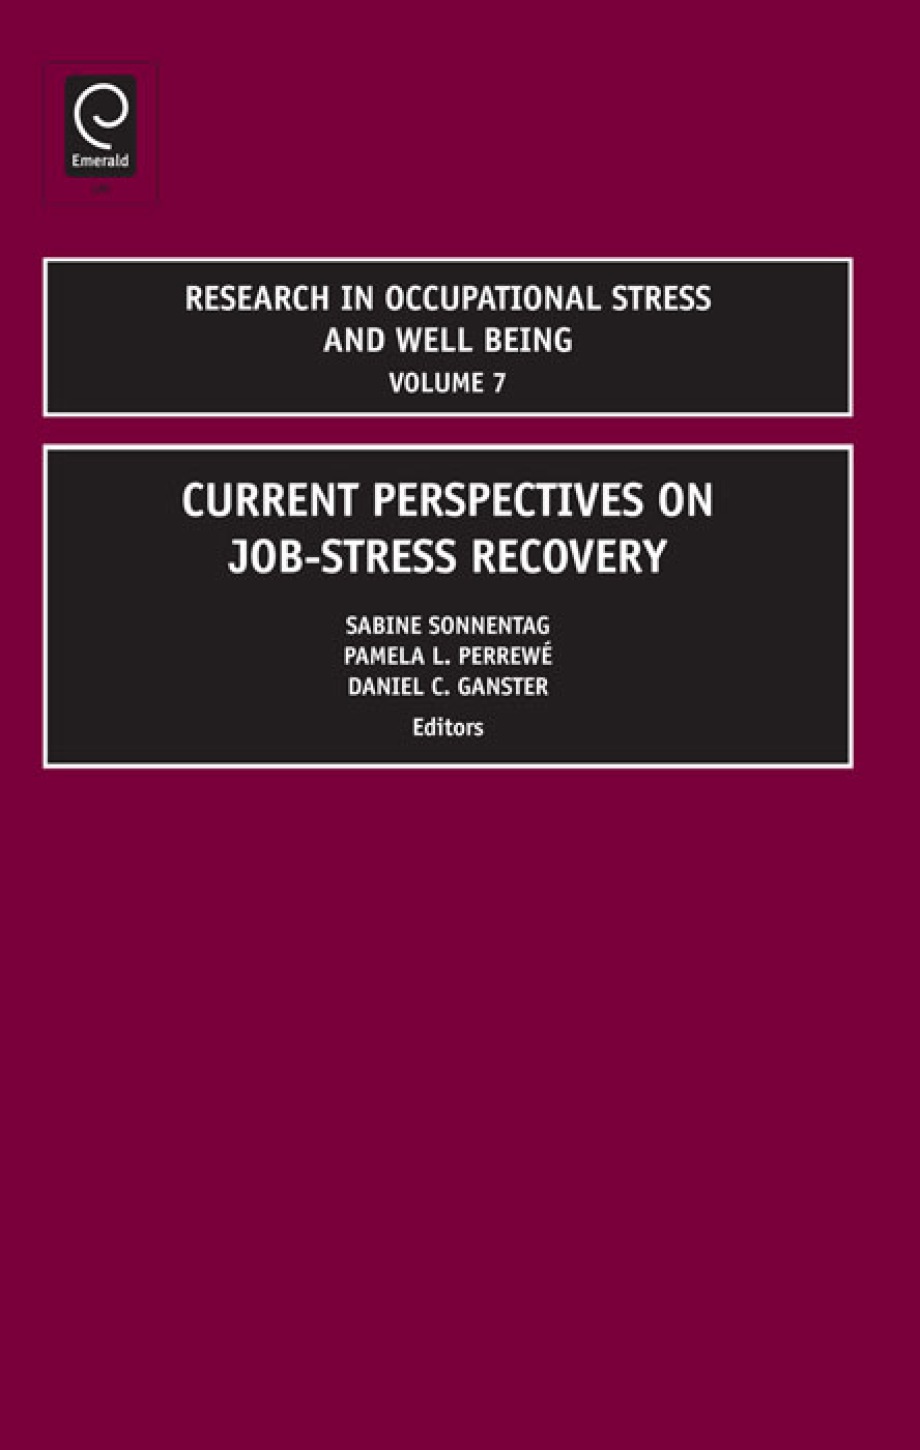 Research in Occupational Stress and Well being - Sabine Sonnetag, Pamela L. Perrewe, Daniel C. Ganster